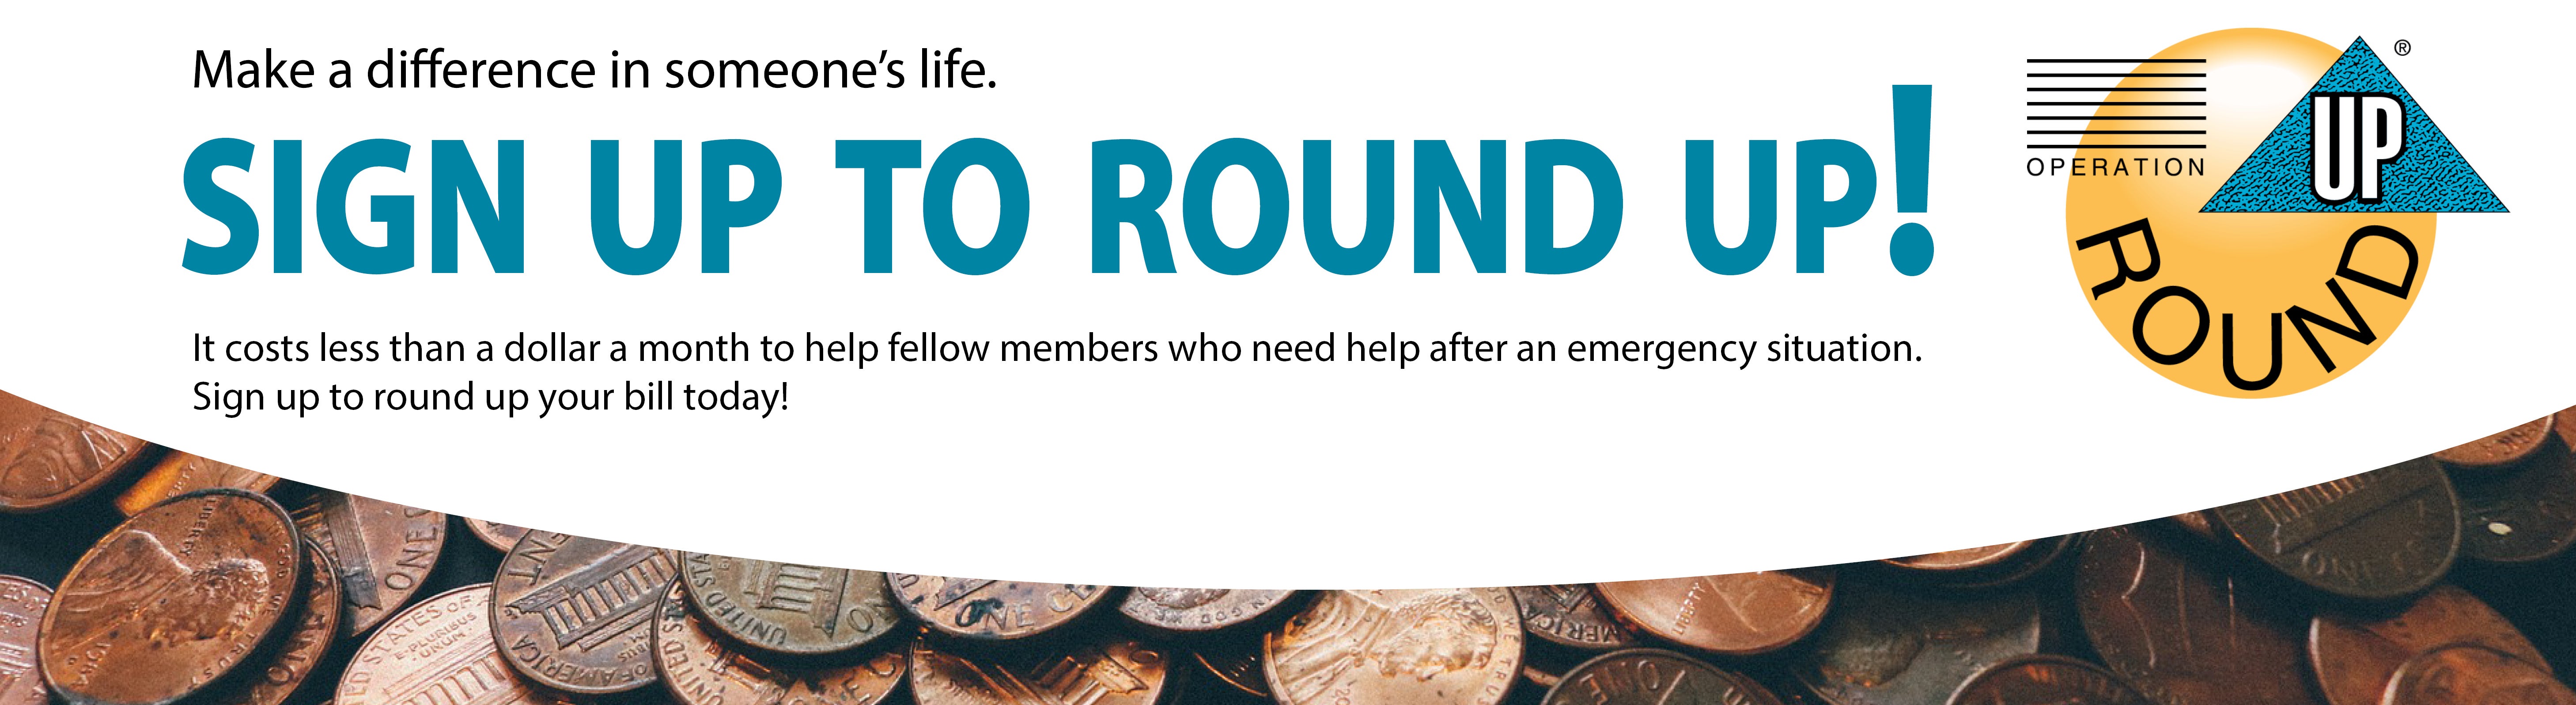 Sign up to round up